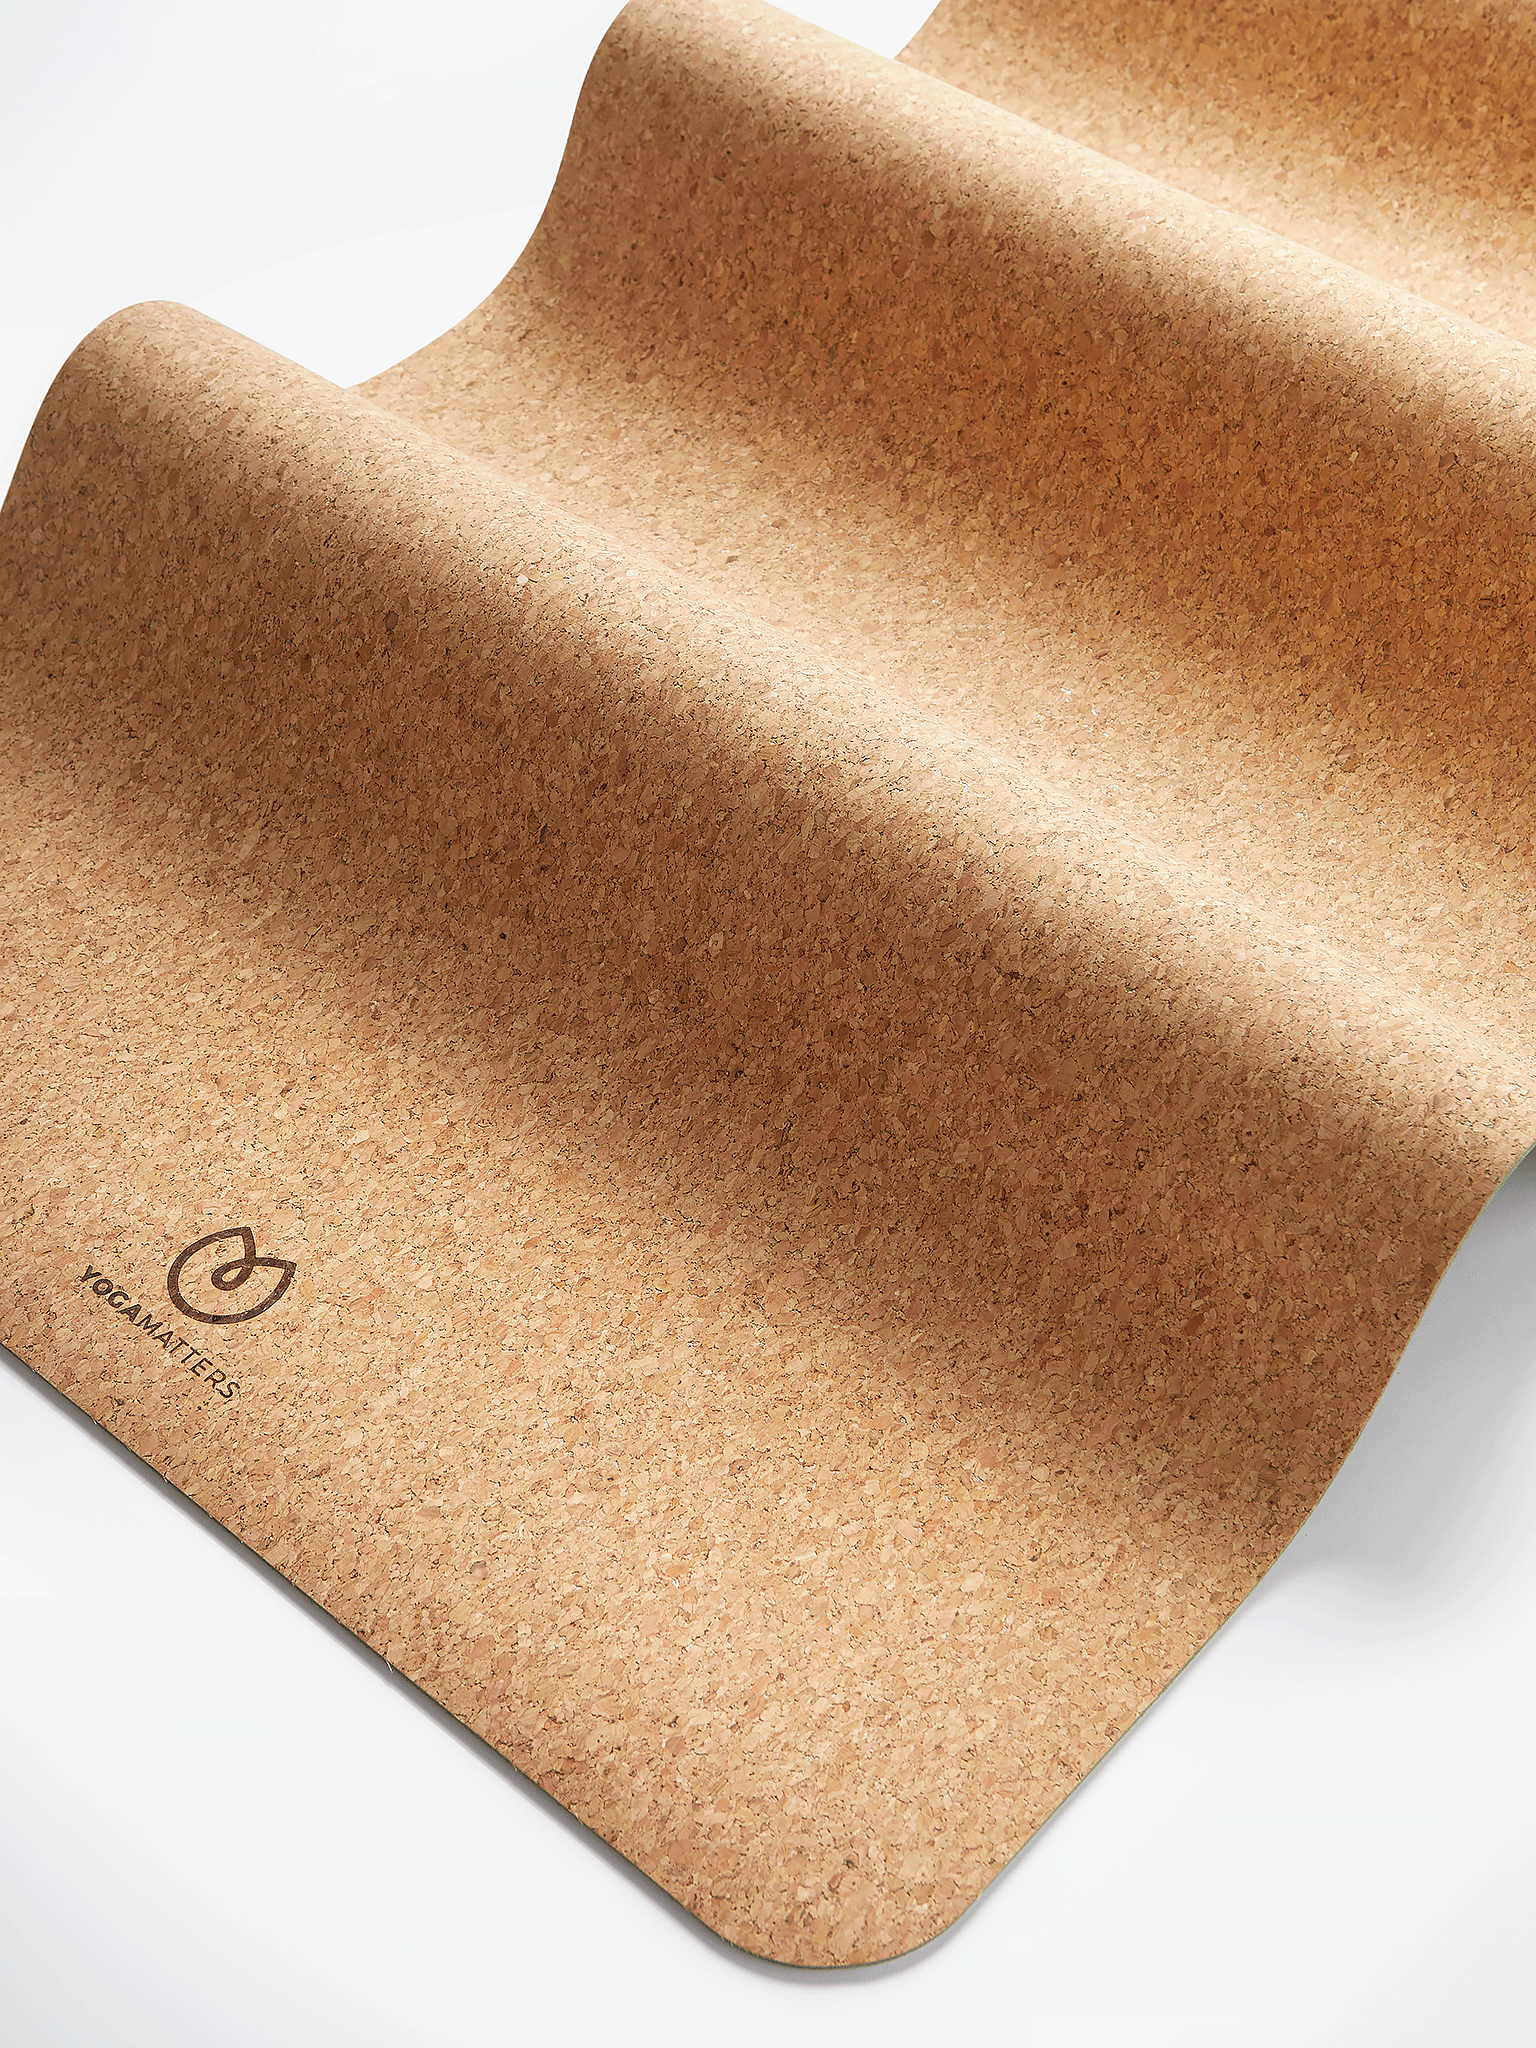 Eco-friendly cork yoga mat by YOGAMATTERS, close-up side view on white background